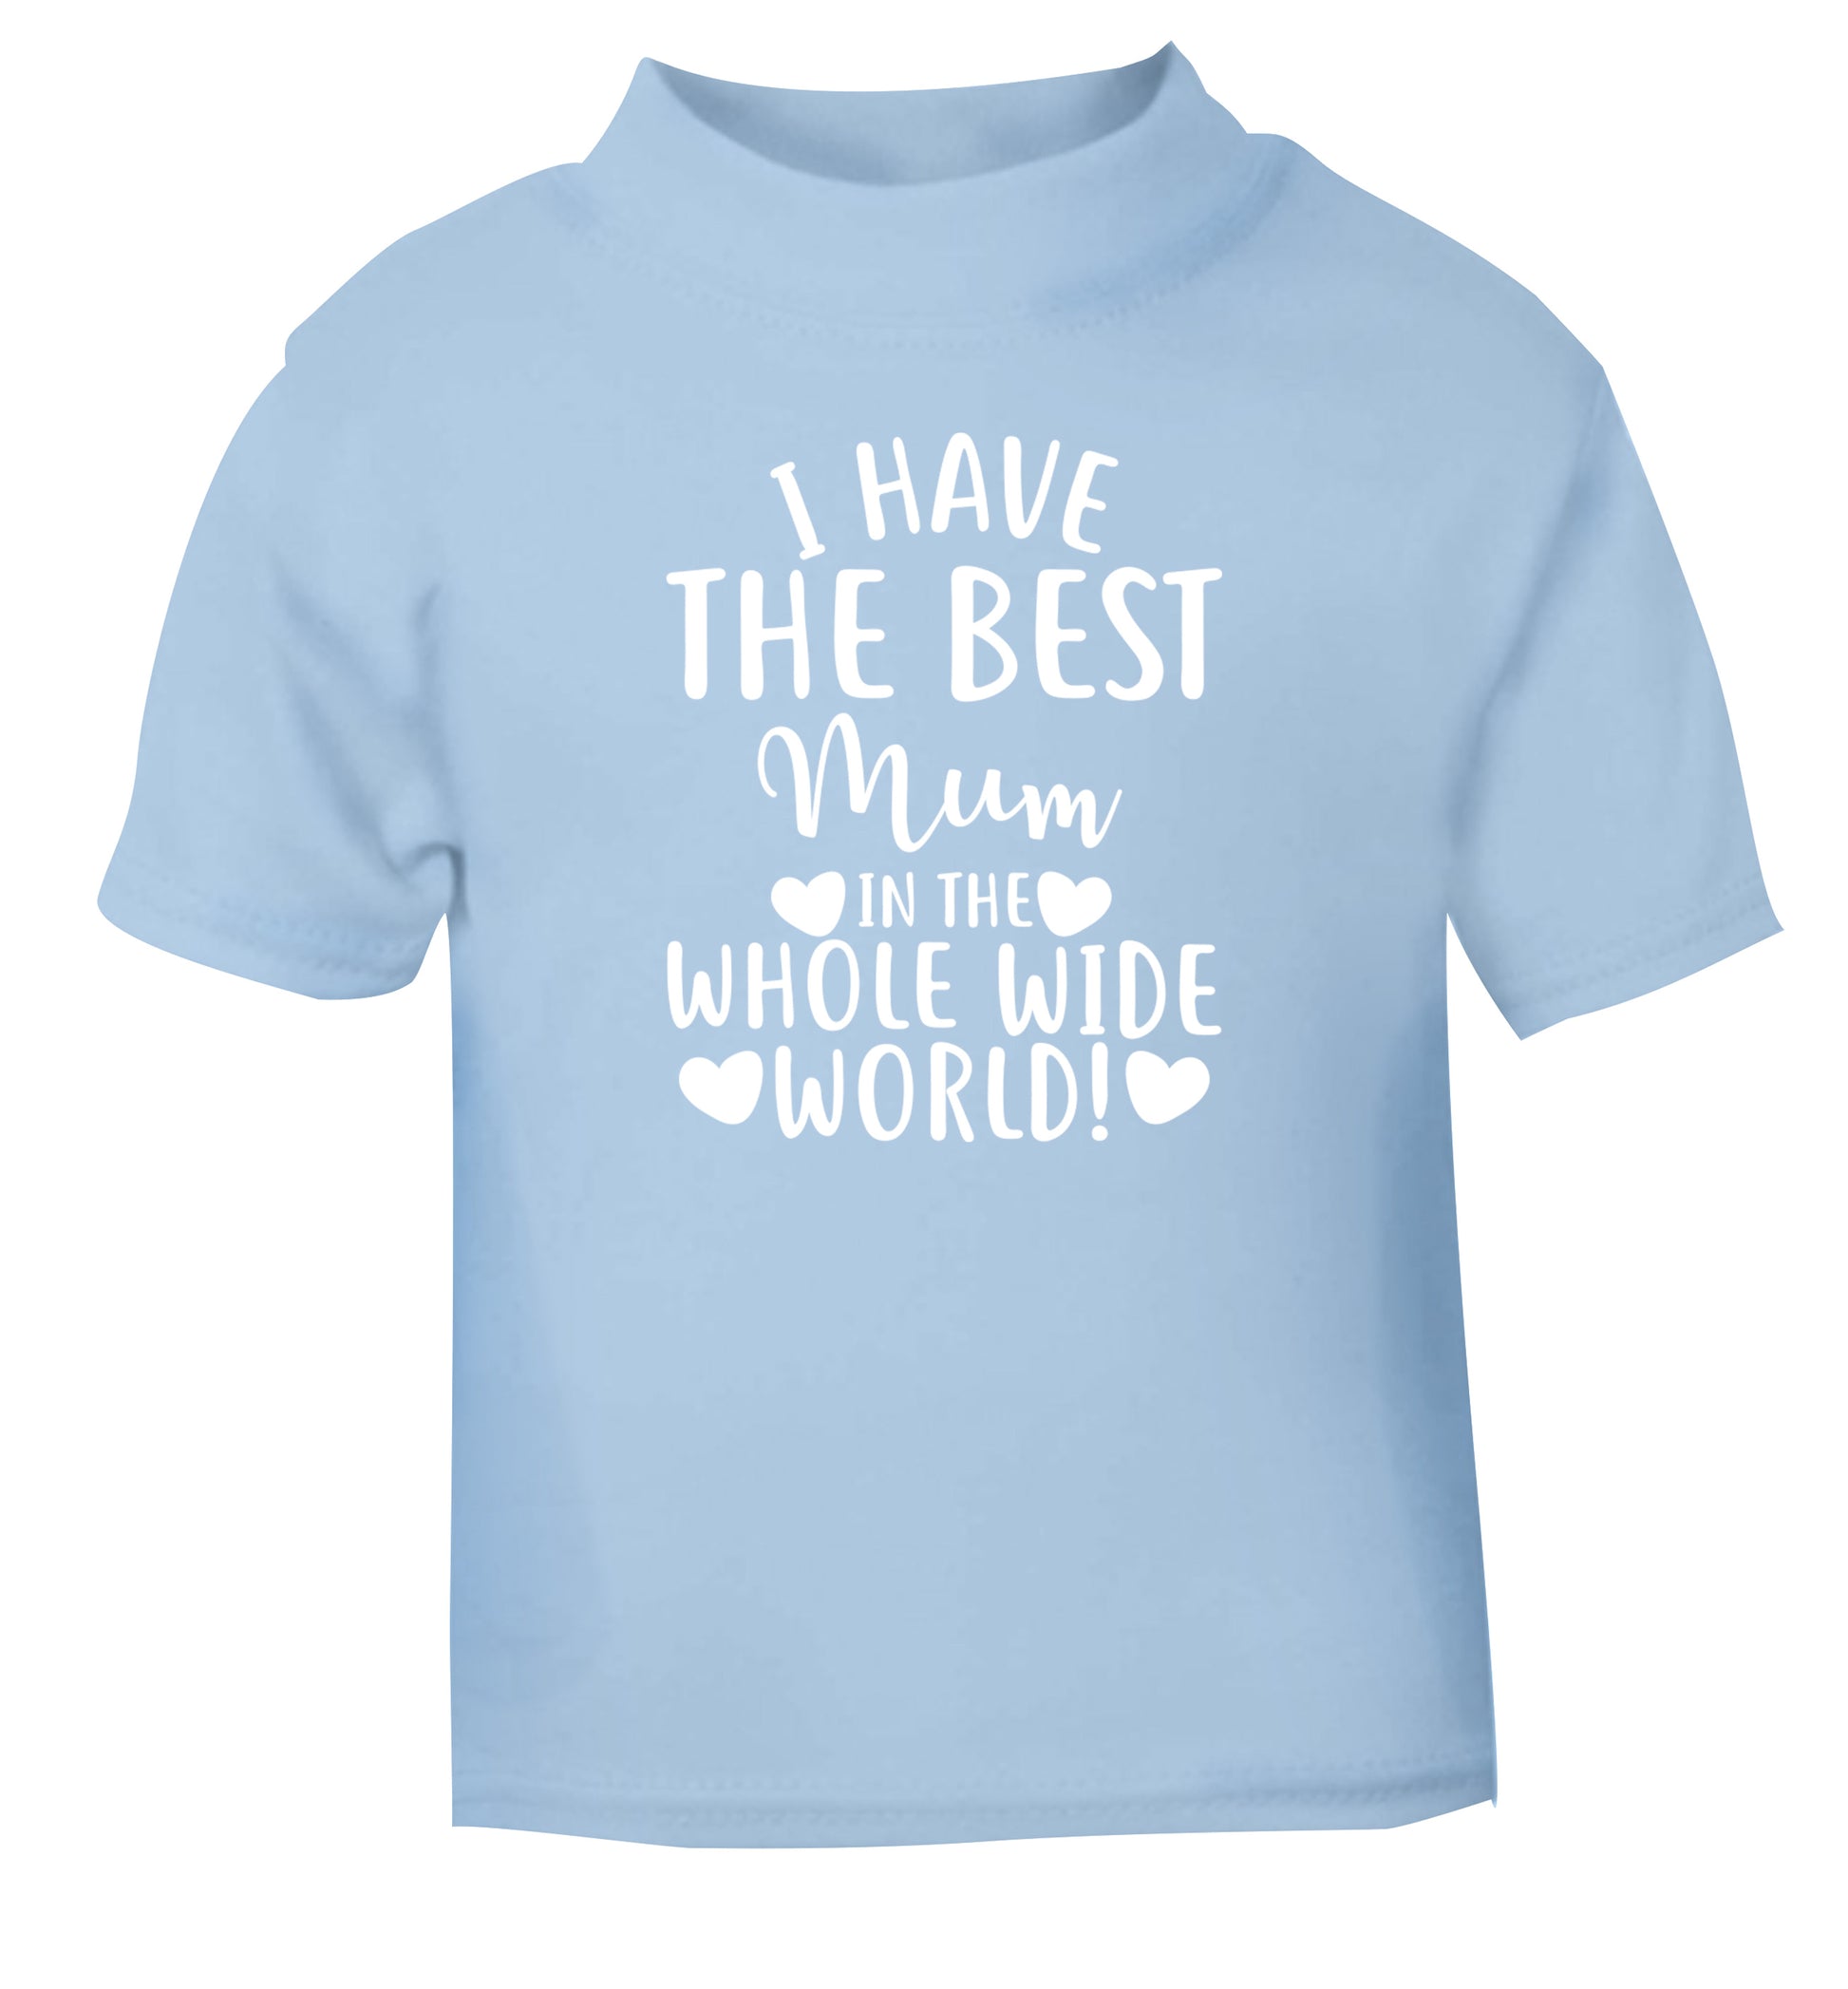 I have the best mum in the whole wide world! light blue Baby Toddler Tshirt 2 Years